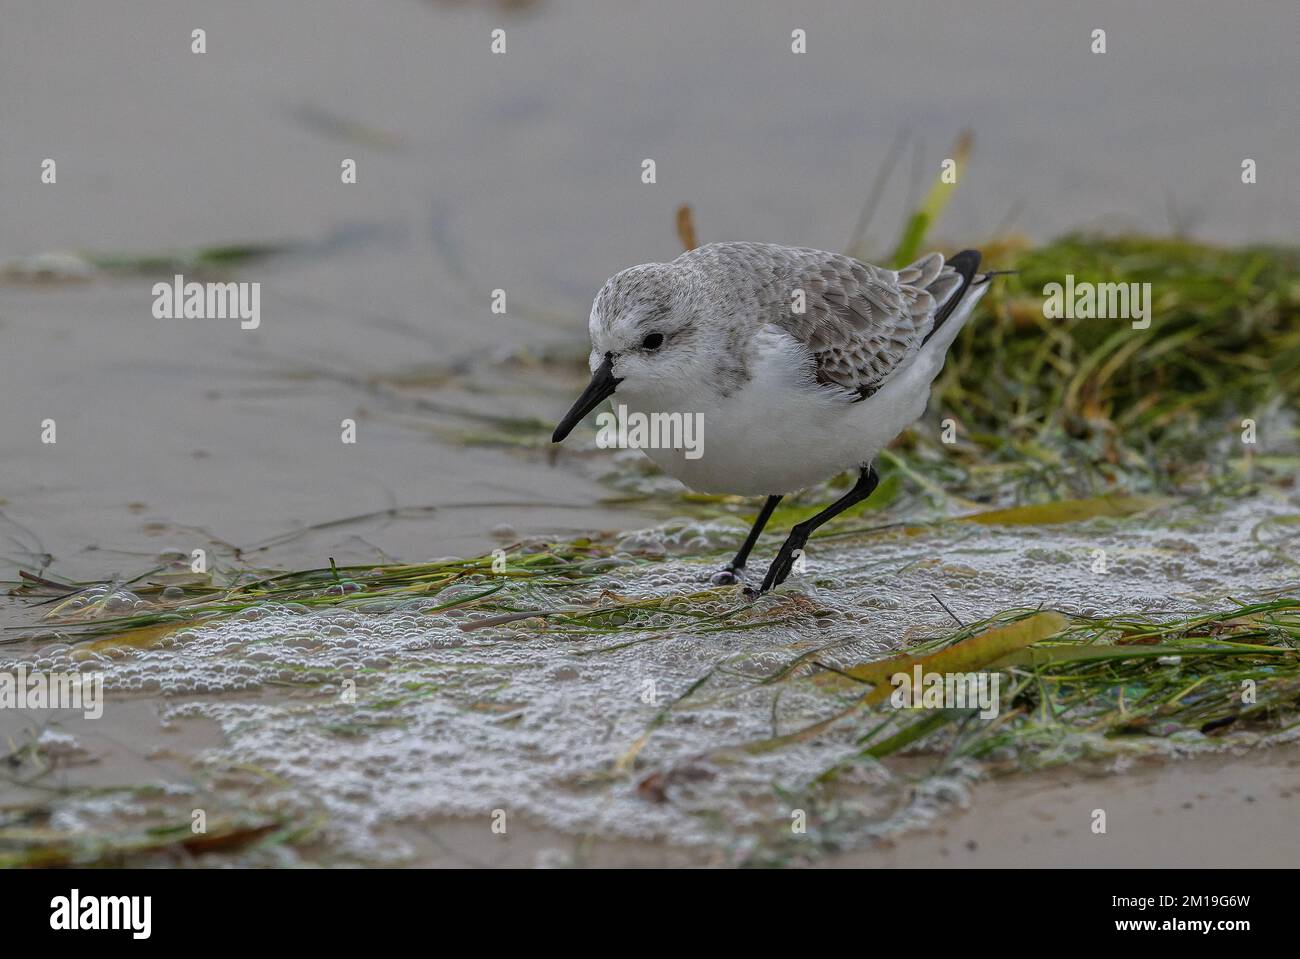 Sanderling, Calidris alba, feeding among washed up eel-grass on sandy beach in winter, after storms. Stock Photo